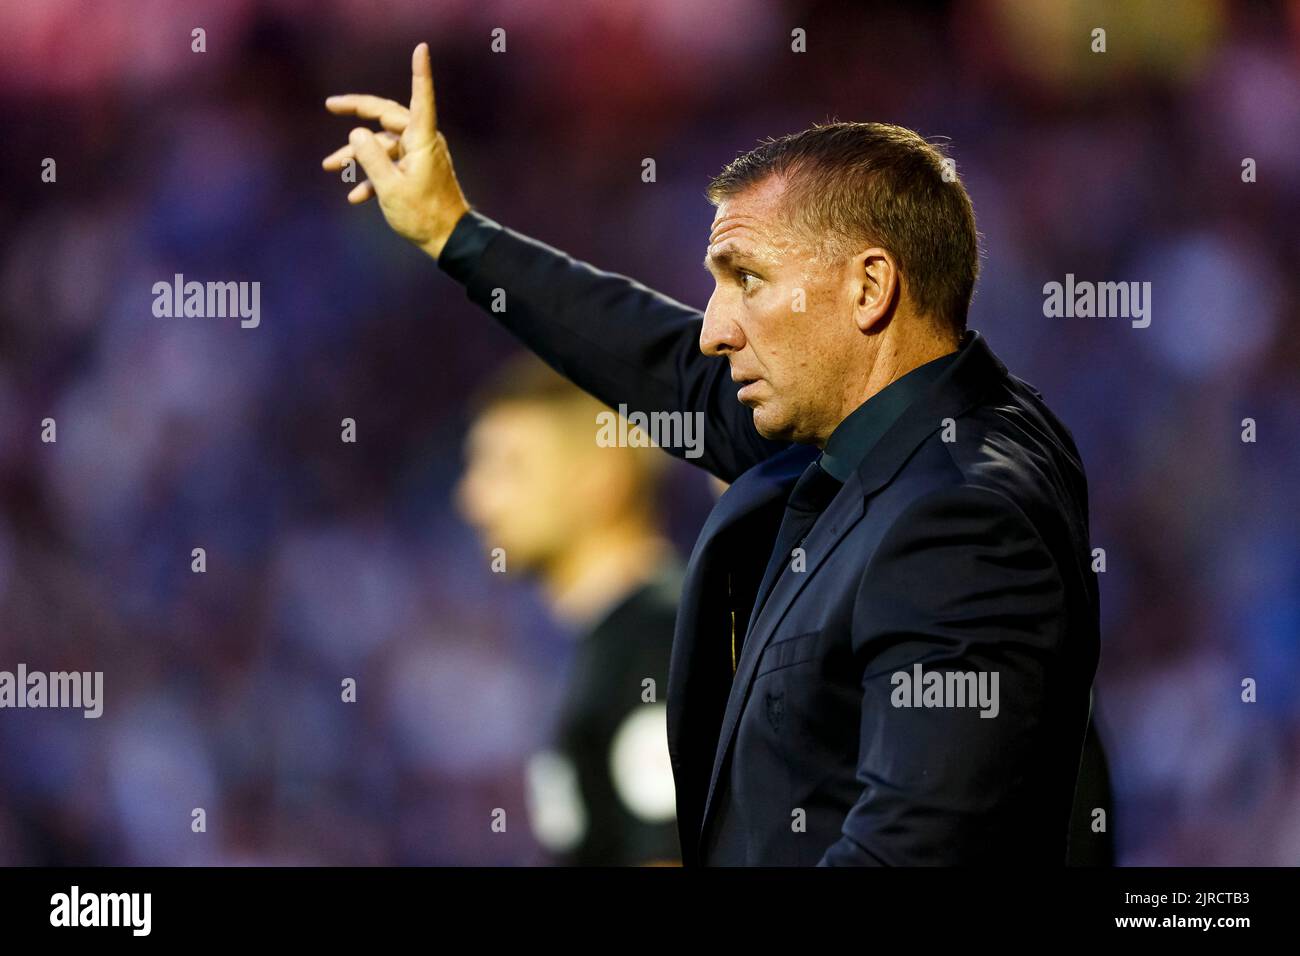 Manchester, UK. 23rd Aug, 2022. Leicester City Manager Brendan Rodgers during the Carabao Cup Second Round match between Stockport County and Leicester City at Edgeley Park on August 23rd 2022 in Manchester, England. (Photo by Daniel Chesterton/phcimages.com) Credit: PHC Images/Alamy Live News Stock Photo